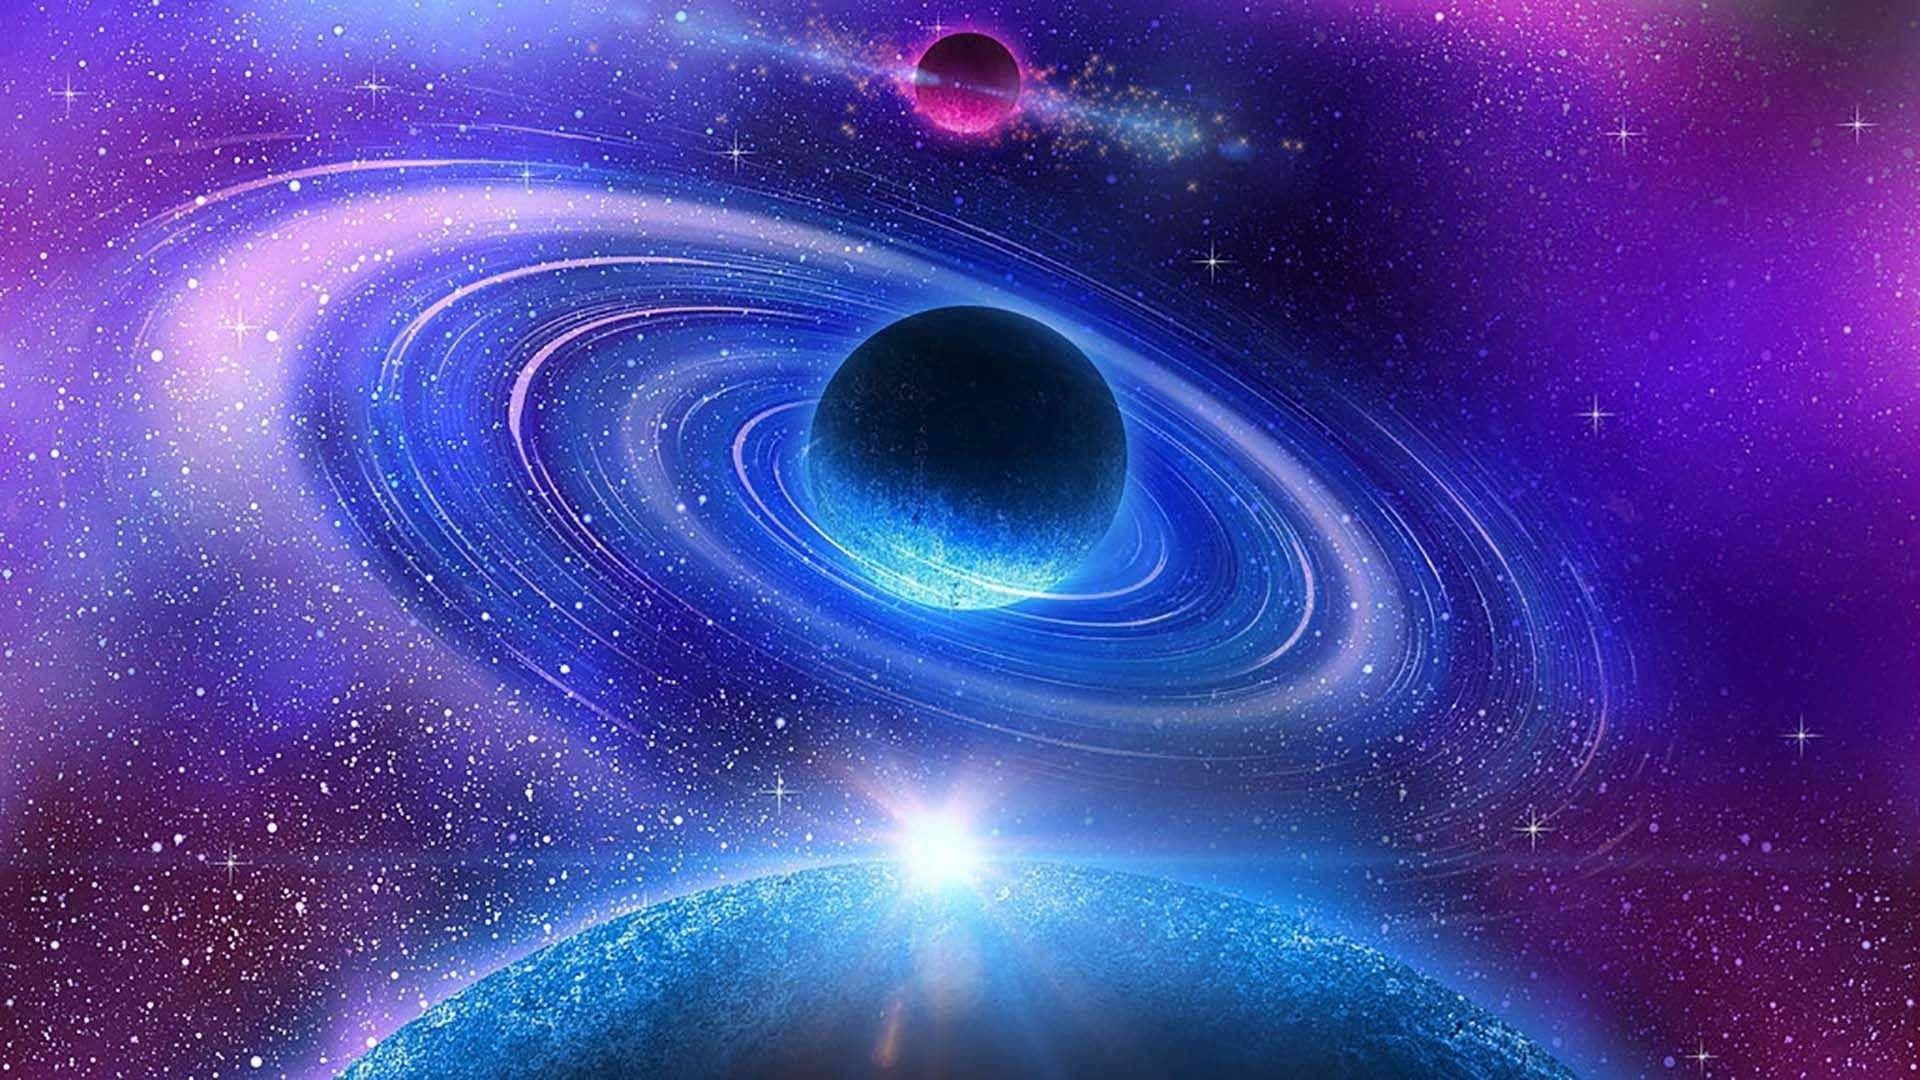 Cool Galaxy Ringed Planet Wallpaper